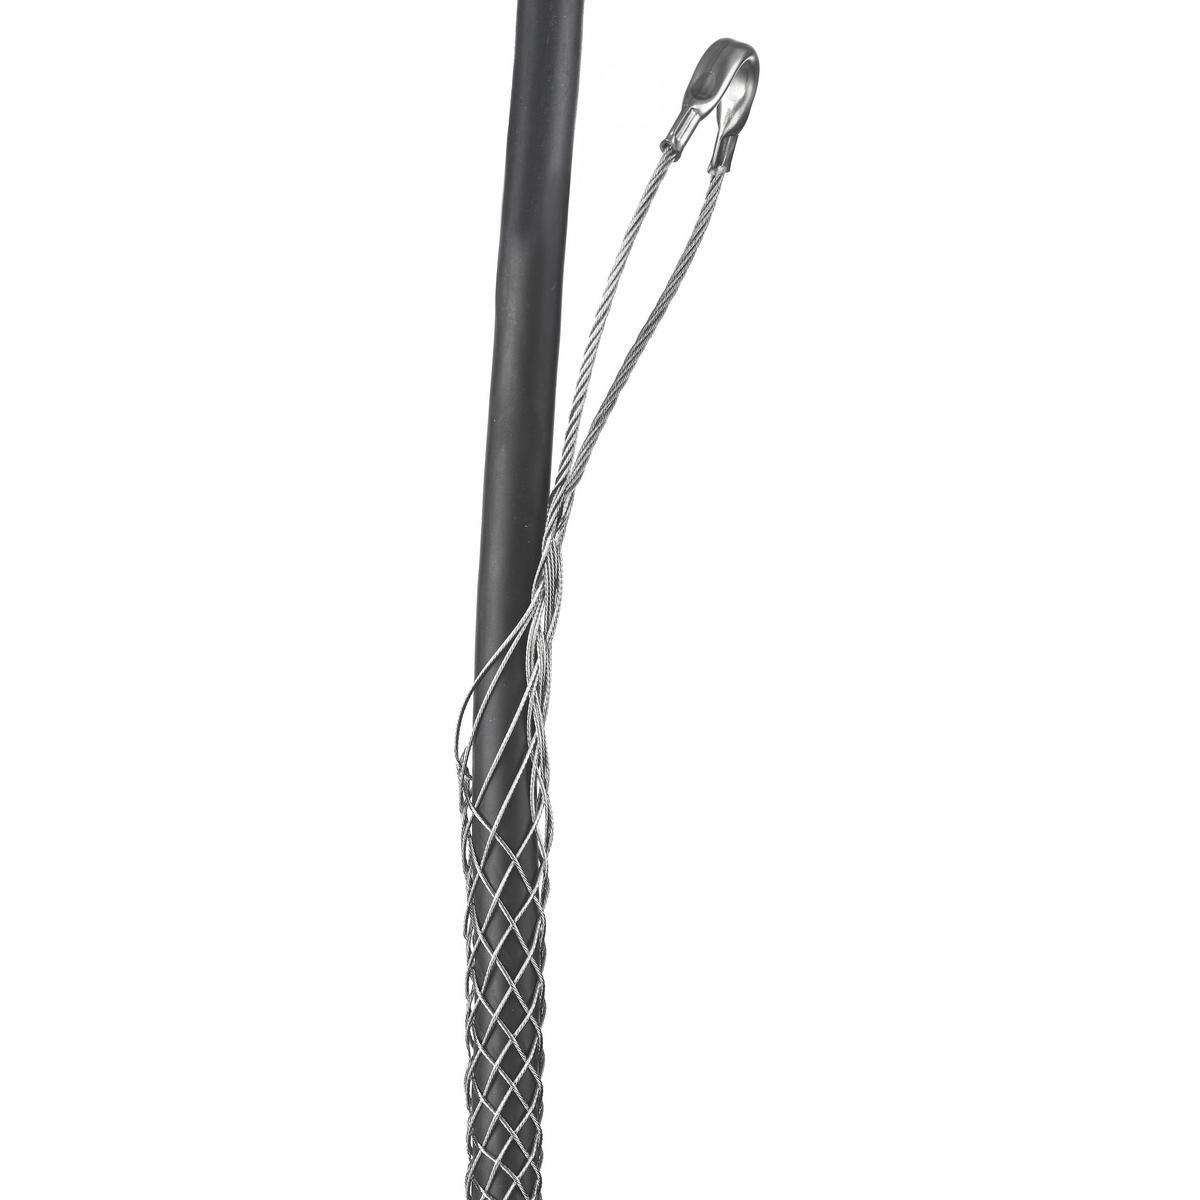 Hubbell 02402038 Support Grips, Offset Eye, Single Weave, Split Mesh, Lace Closing, Stainless Steel, 0.63-0.74"  ; Offset eye ; Strand equalizers position wires for equal loading throughout grip length ; Eye assemblies provide eye reinforcement at support hardware ; Split